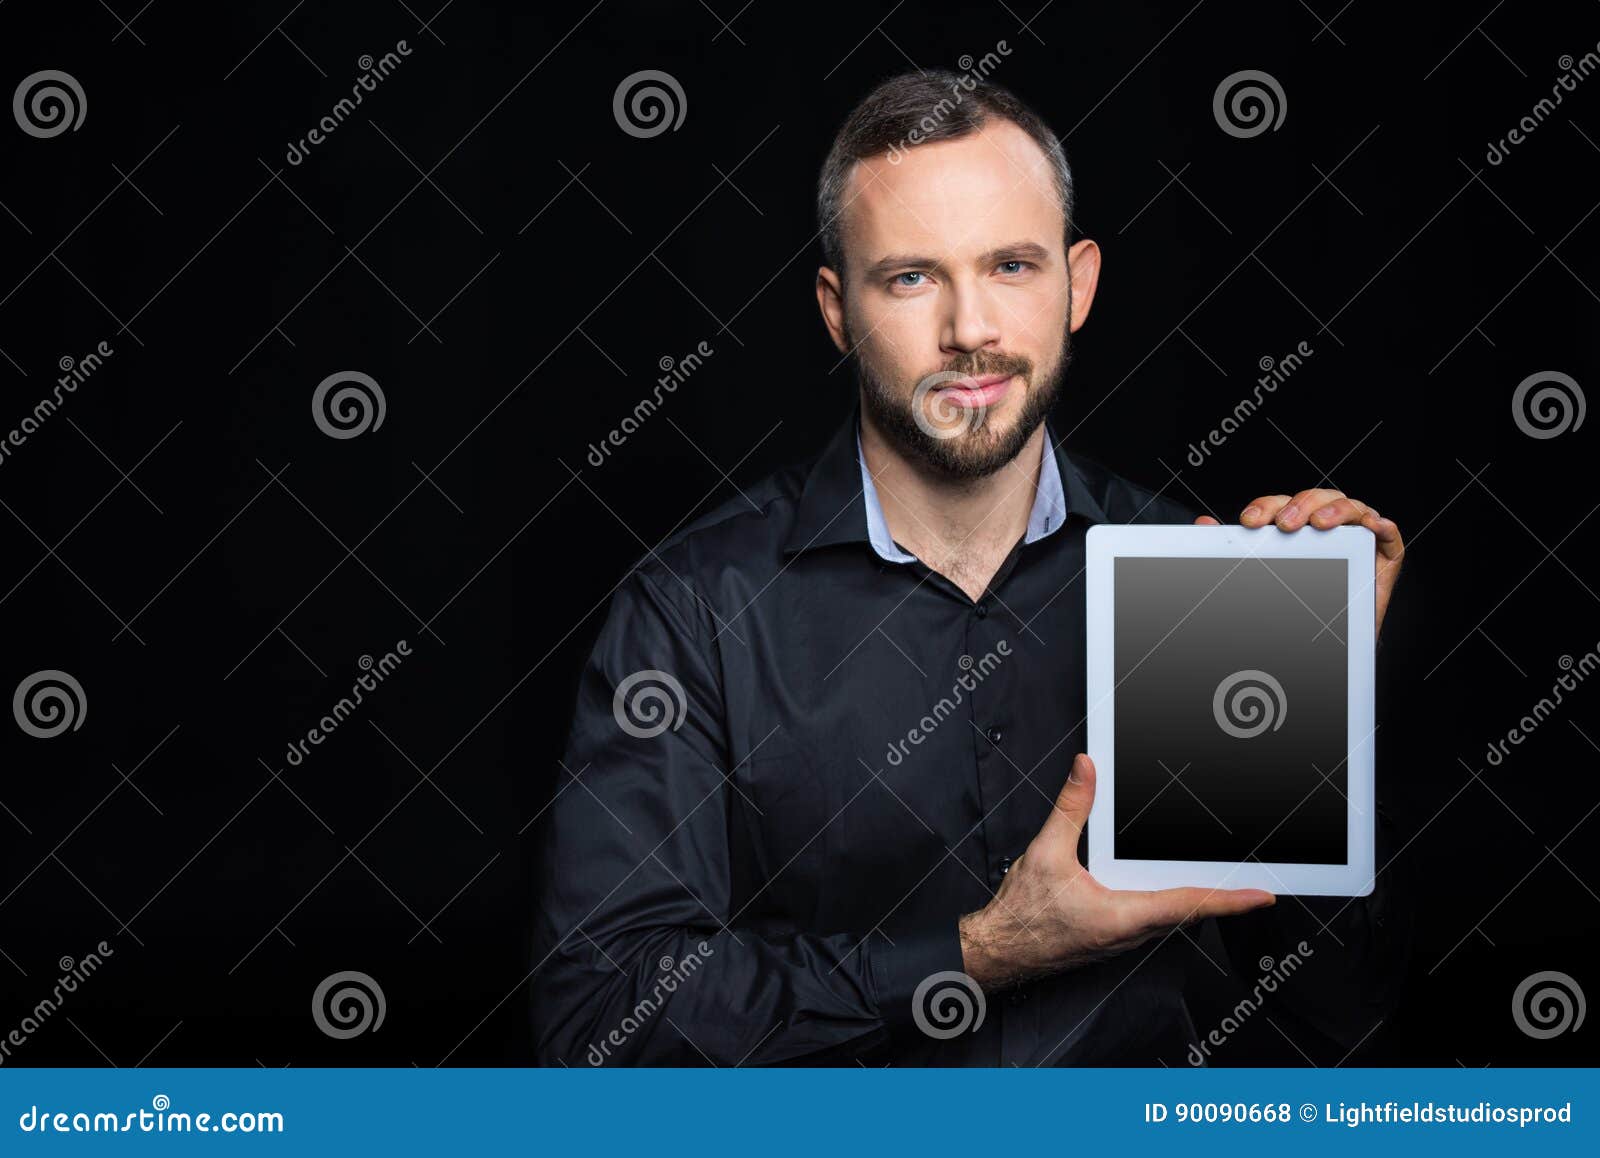 man with digital tablet